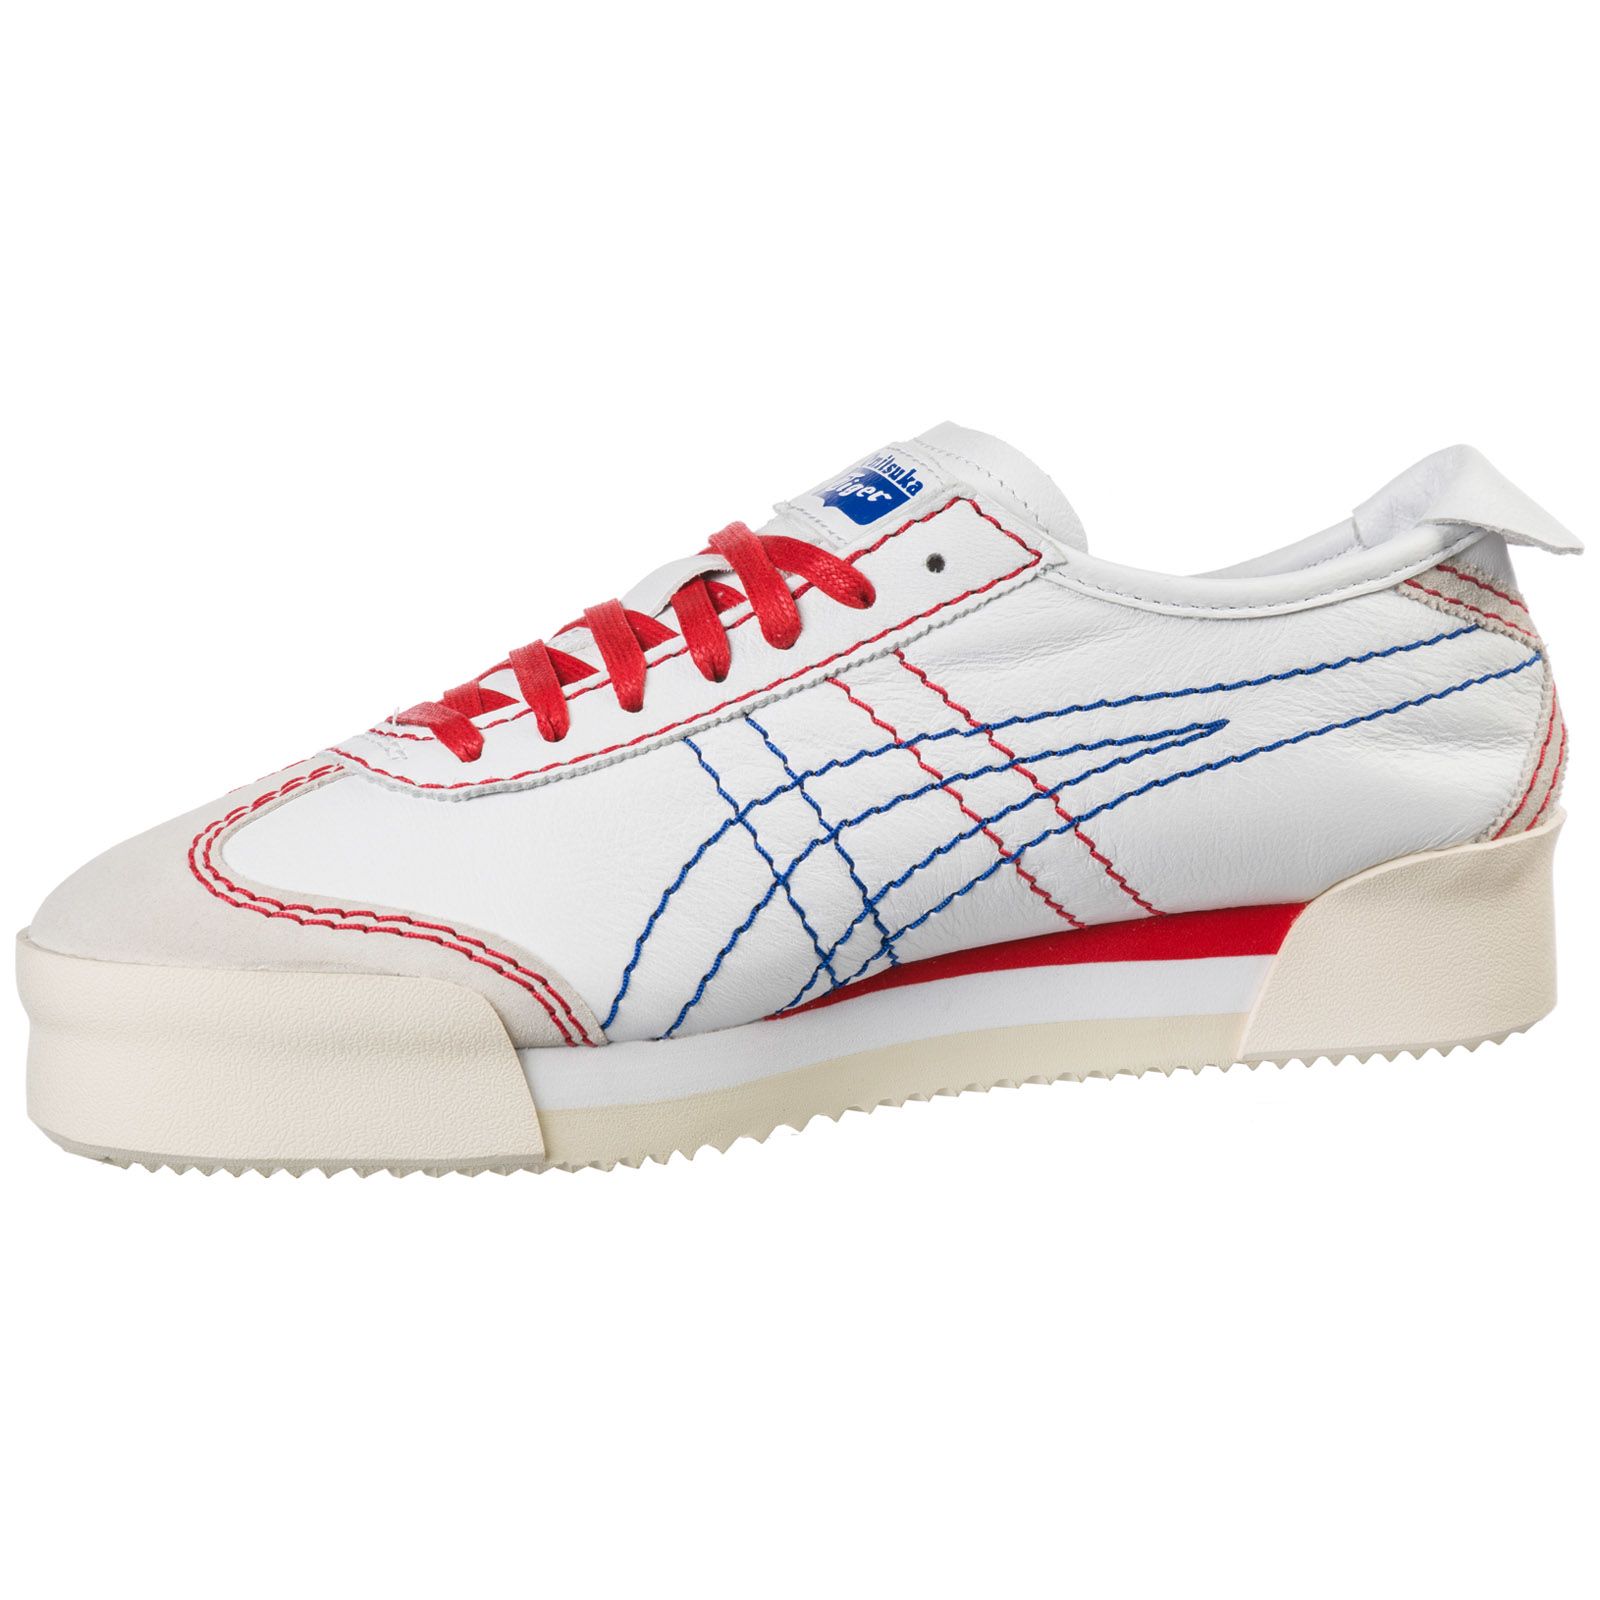 GCDS GCDS Shoes Leather Trainers Sneakers Onitsuka Tiger Mexico - White ...